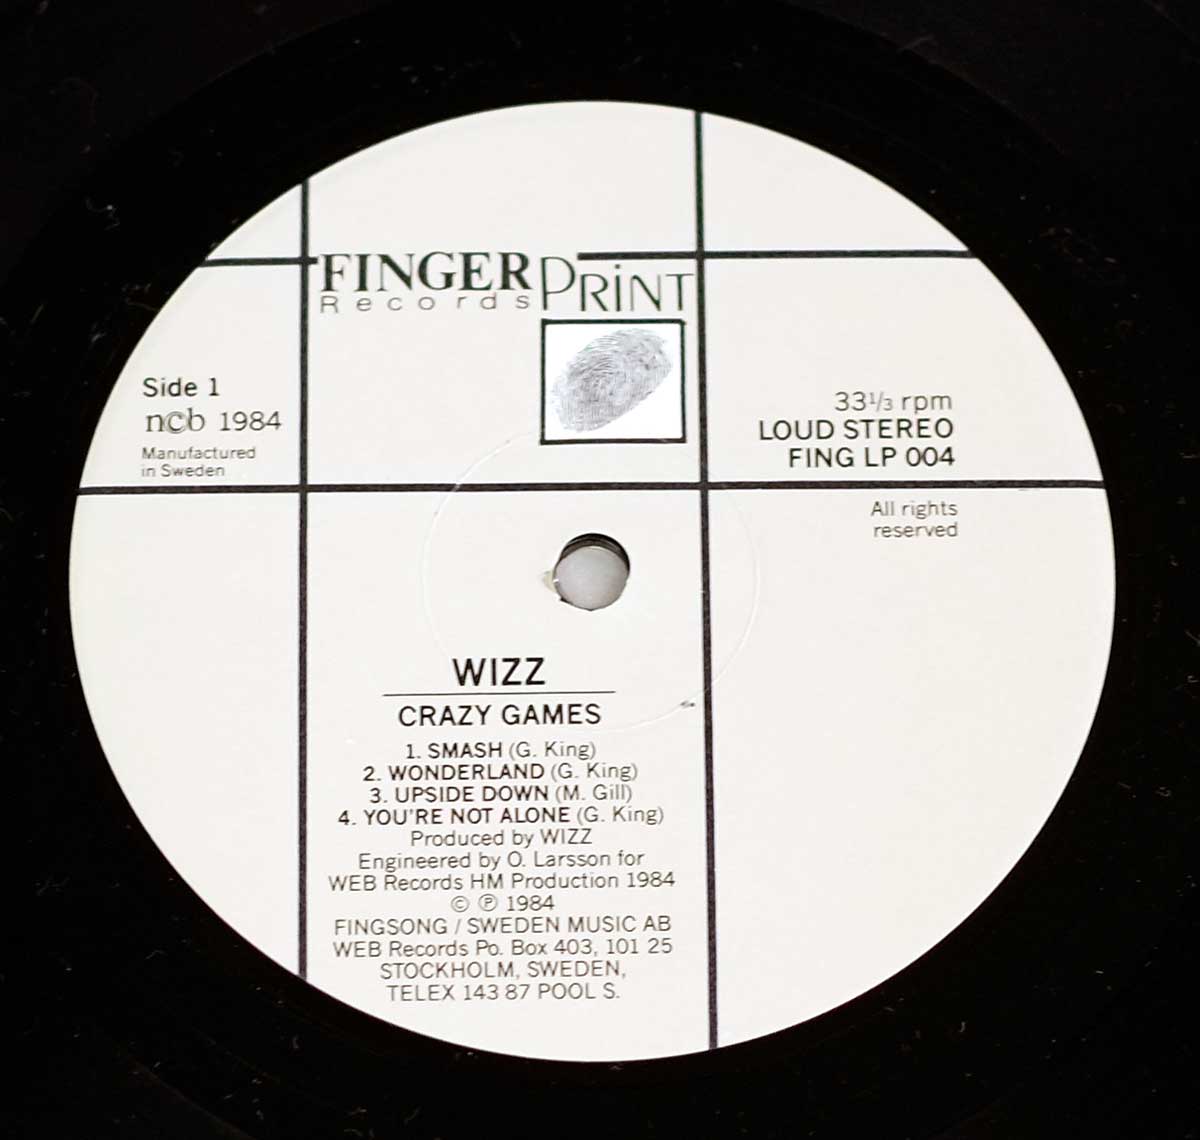 Photo of "WIZZ - Crazy Games" Record Label - Side One: